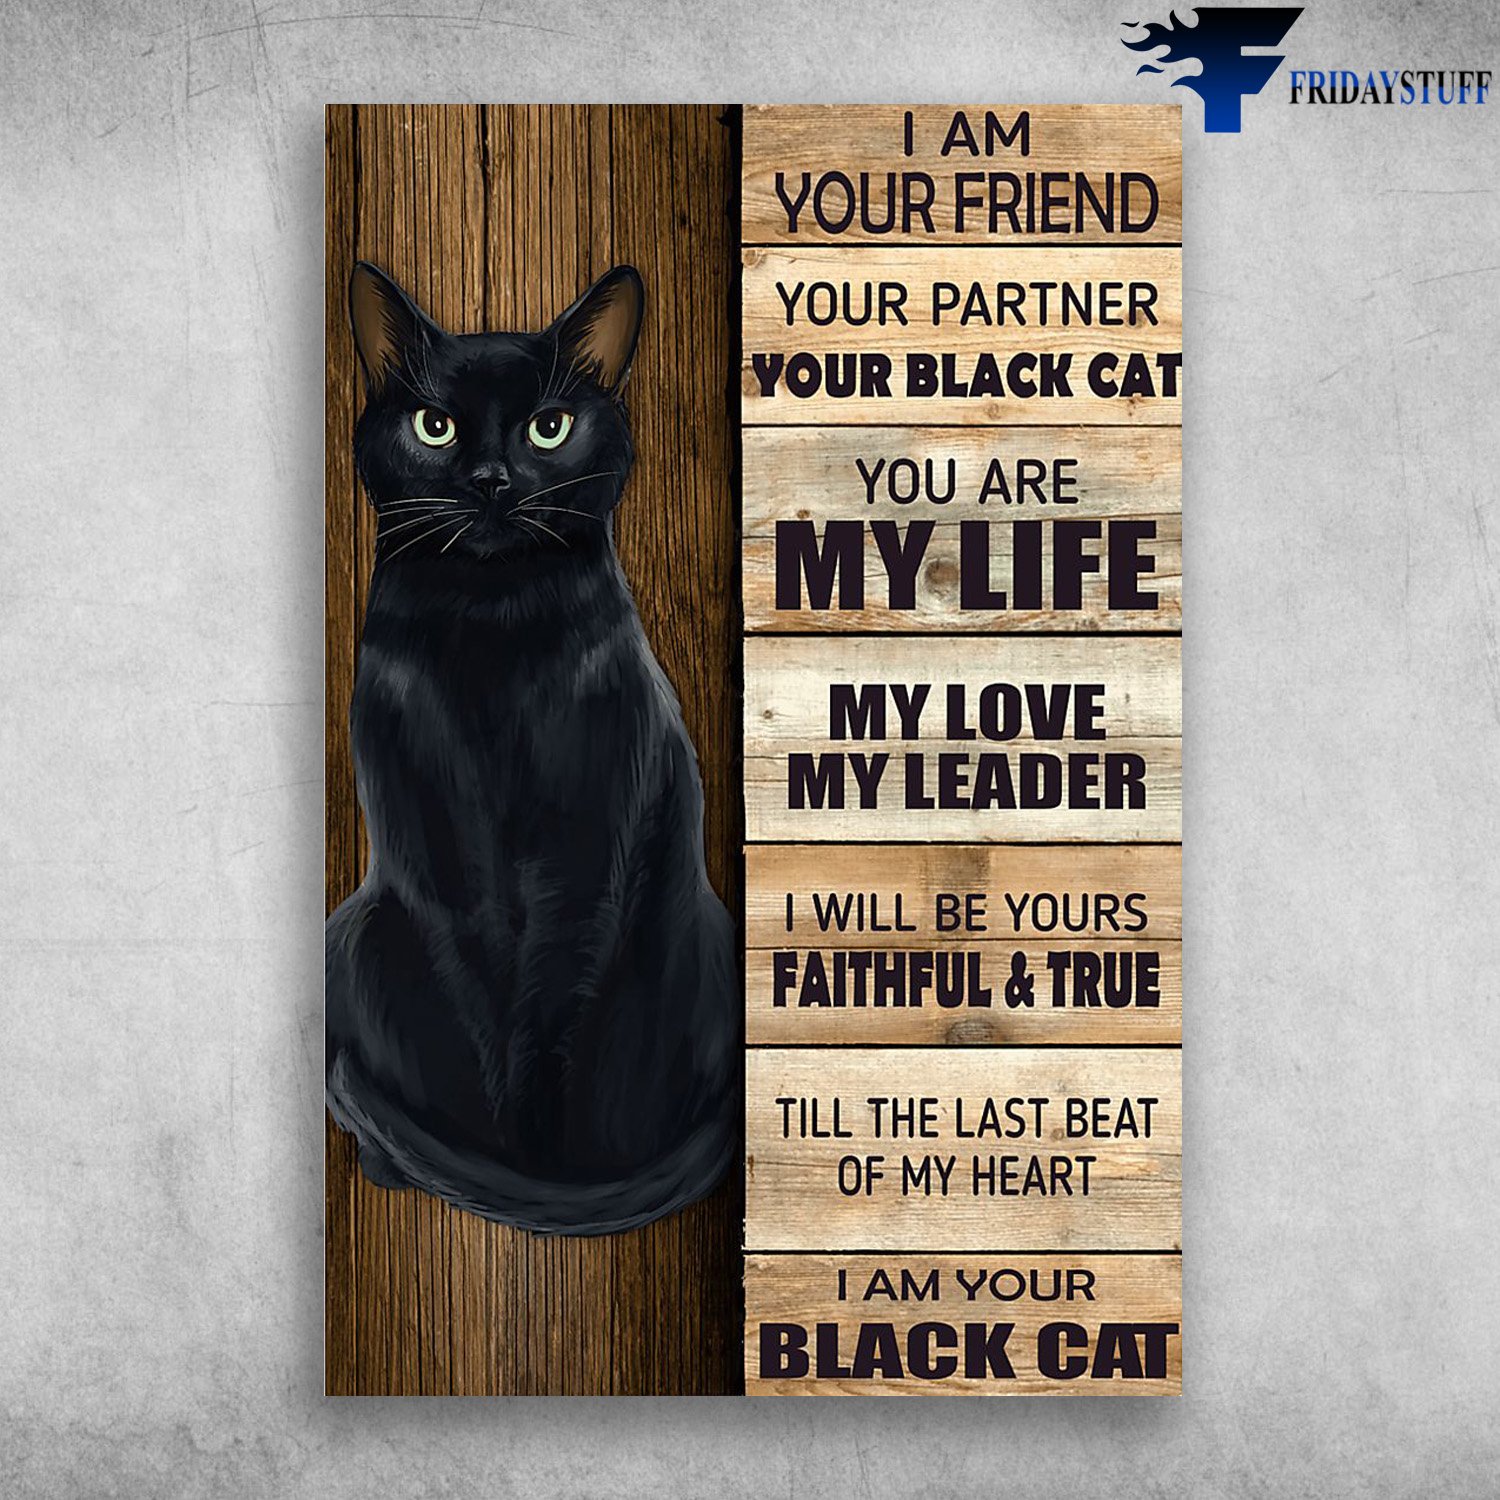 Black Cat - I AM Your Friend, Your Partner, Your Black Cat, You Are My Life, My Love, My Leader, I Will Be Yours Faithfull And True, Till The Last Beat Of M Heart, I Am Your Black Cat